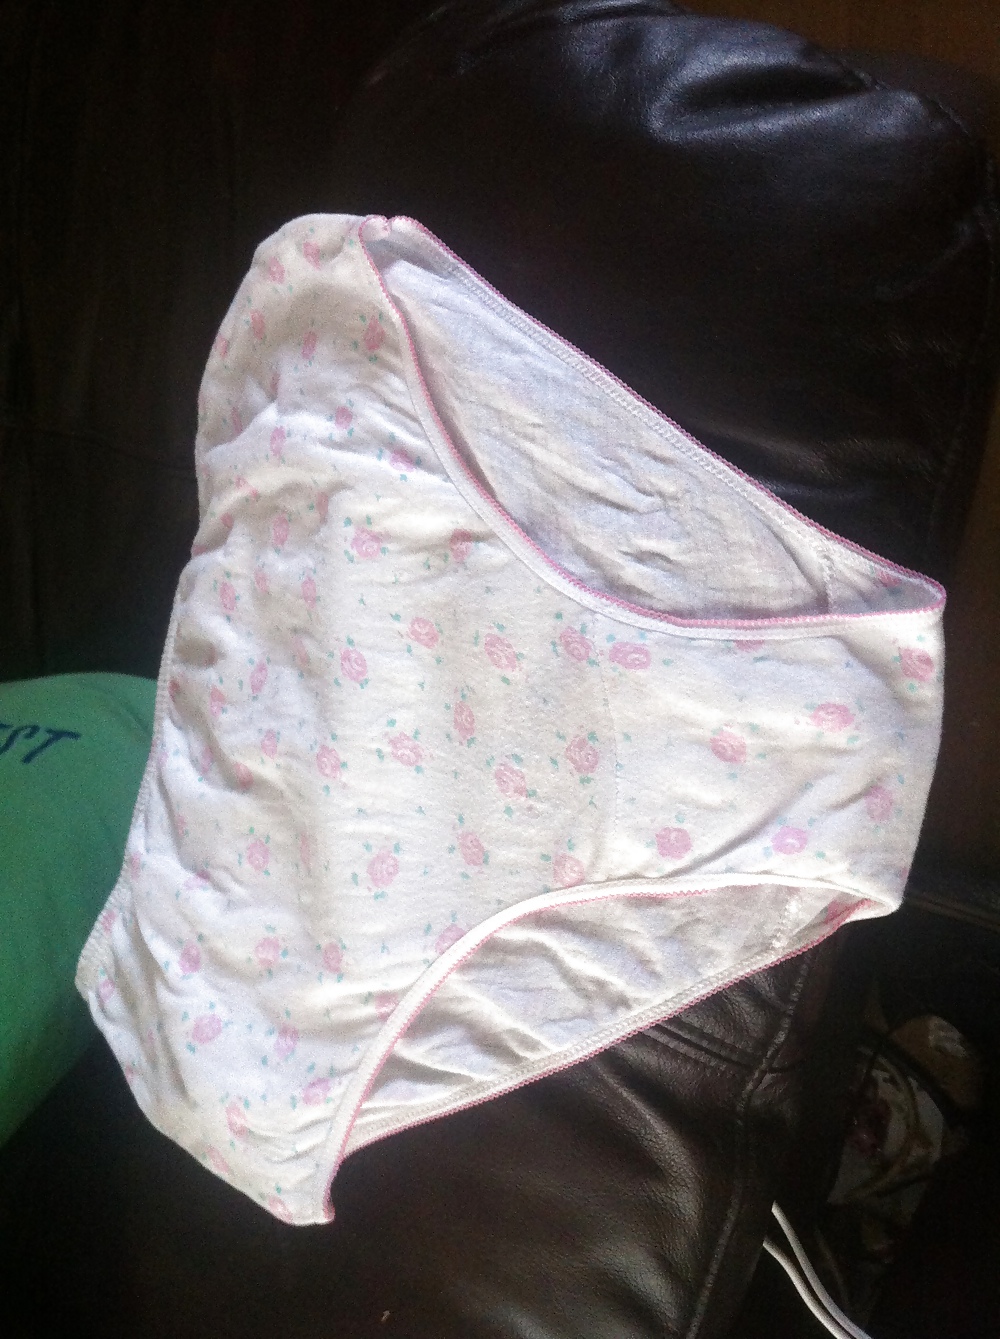 MY MOTHER IN LAWS PANTIES, PLEASE COMMENT #8960545